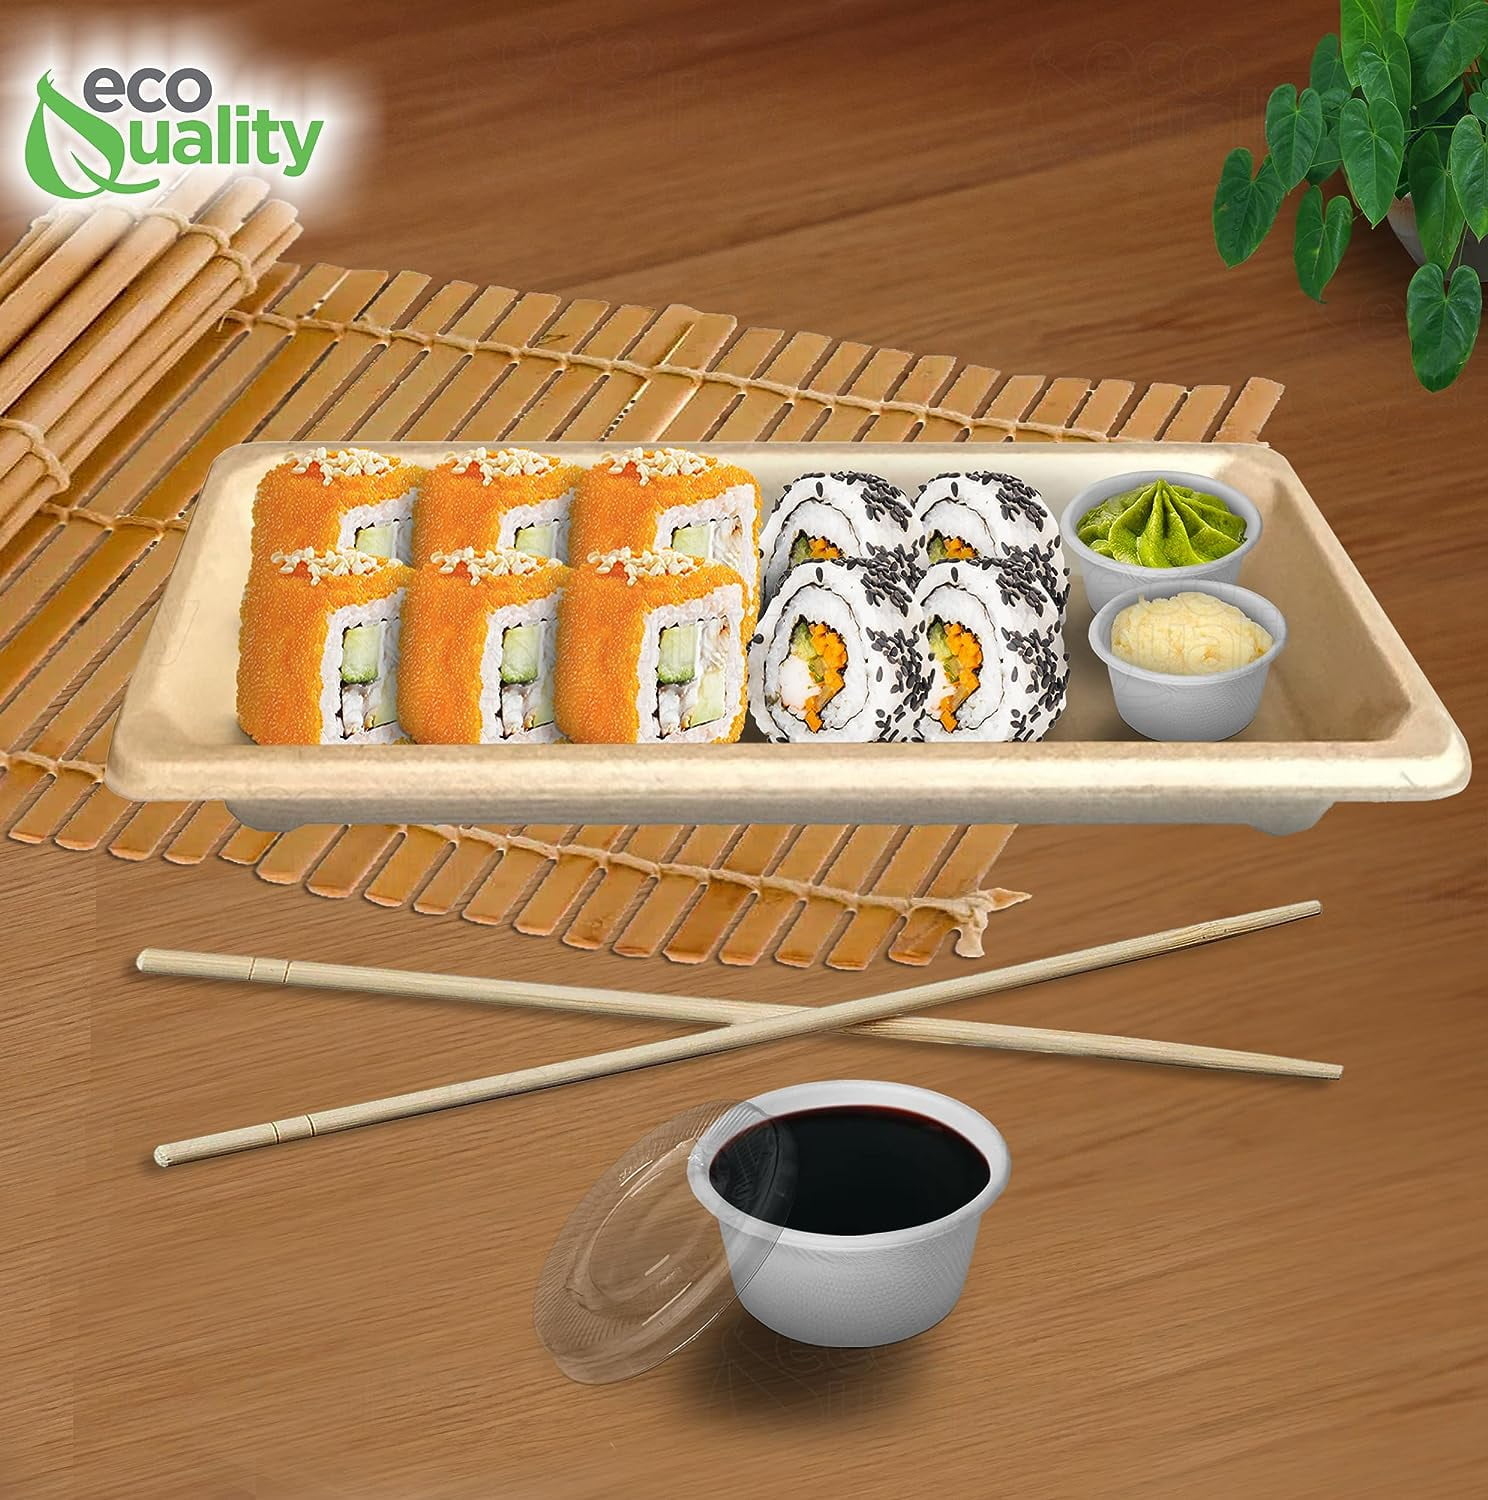 Eco-Products PLA Black Lid Sushi Tray - 6 x 9 x 1.75 - EP-SH3-CPK -  600/Case - US Supply House